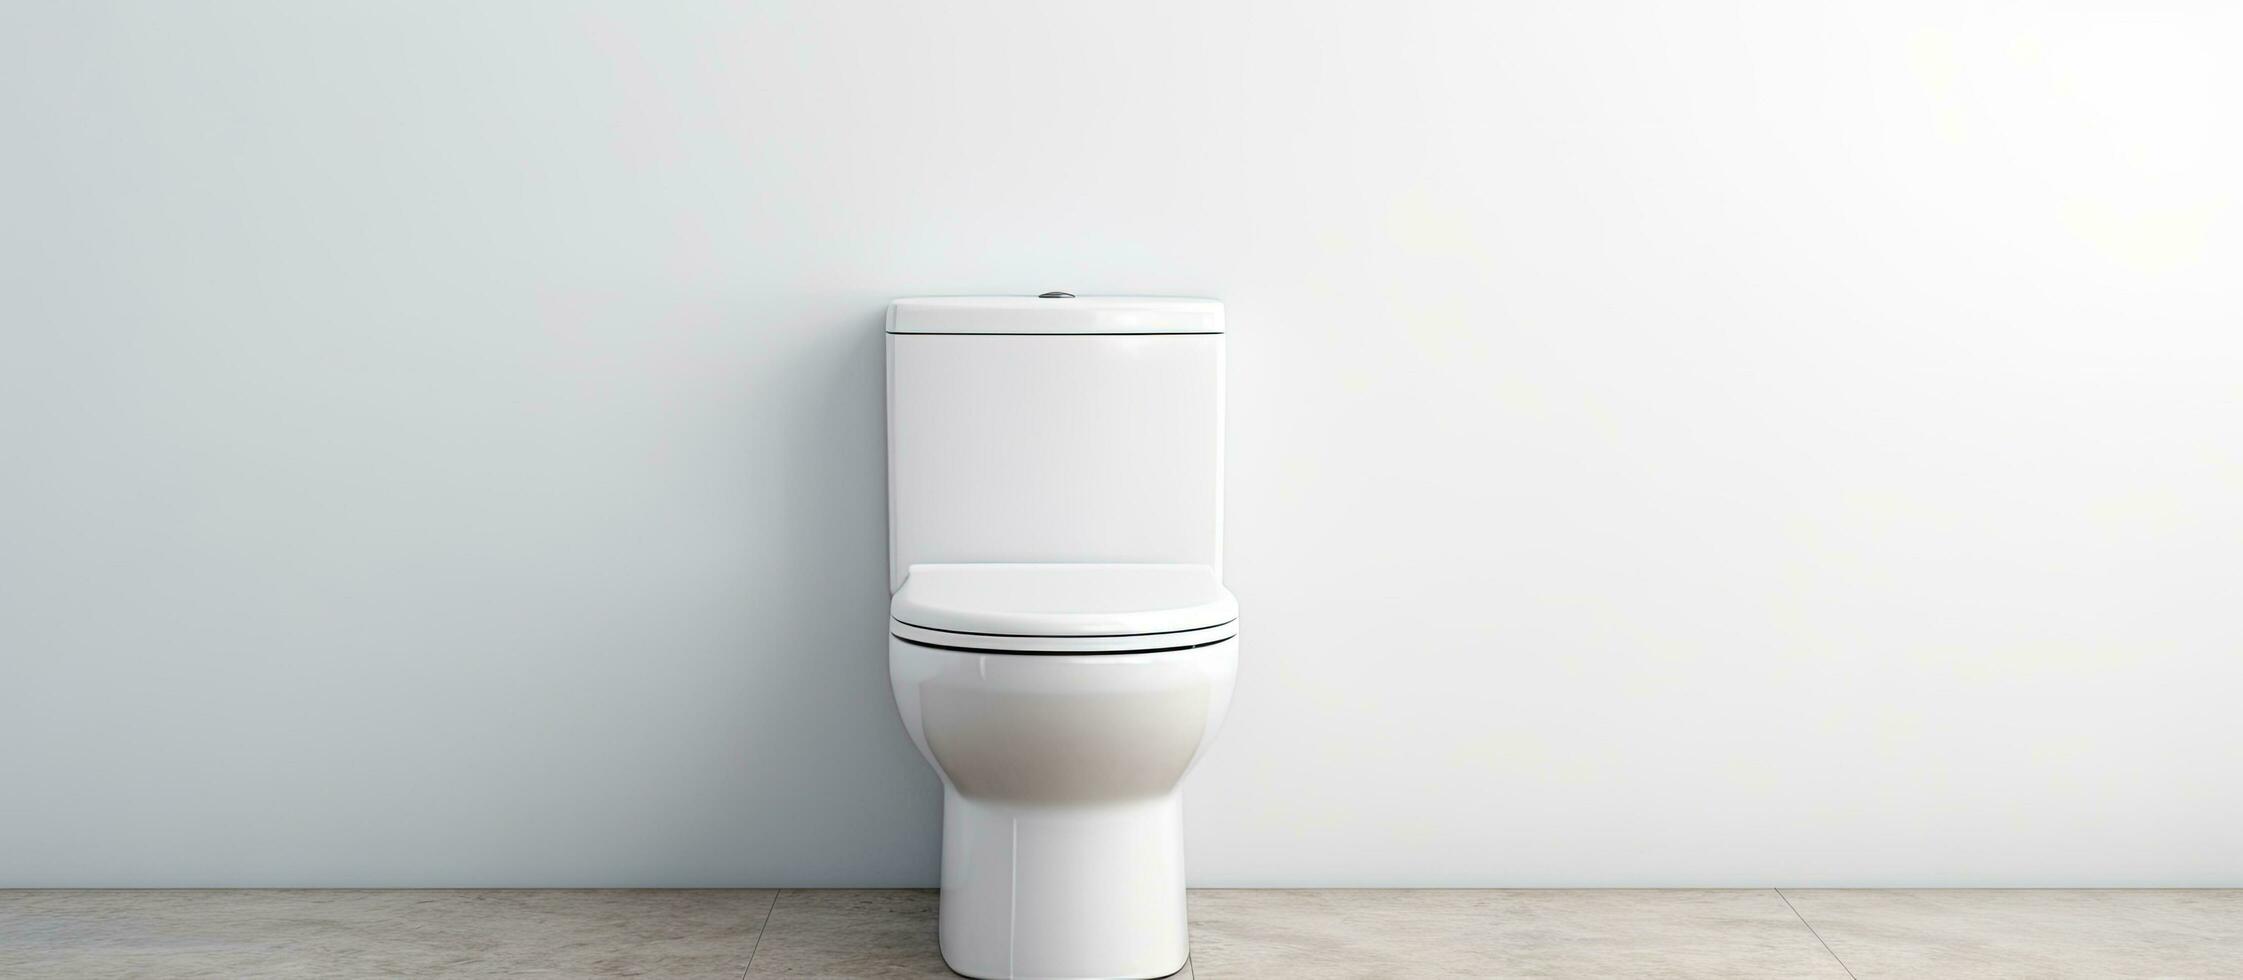 Photo of a minimalist white toilet against a clean white wall with copy space